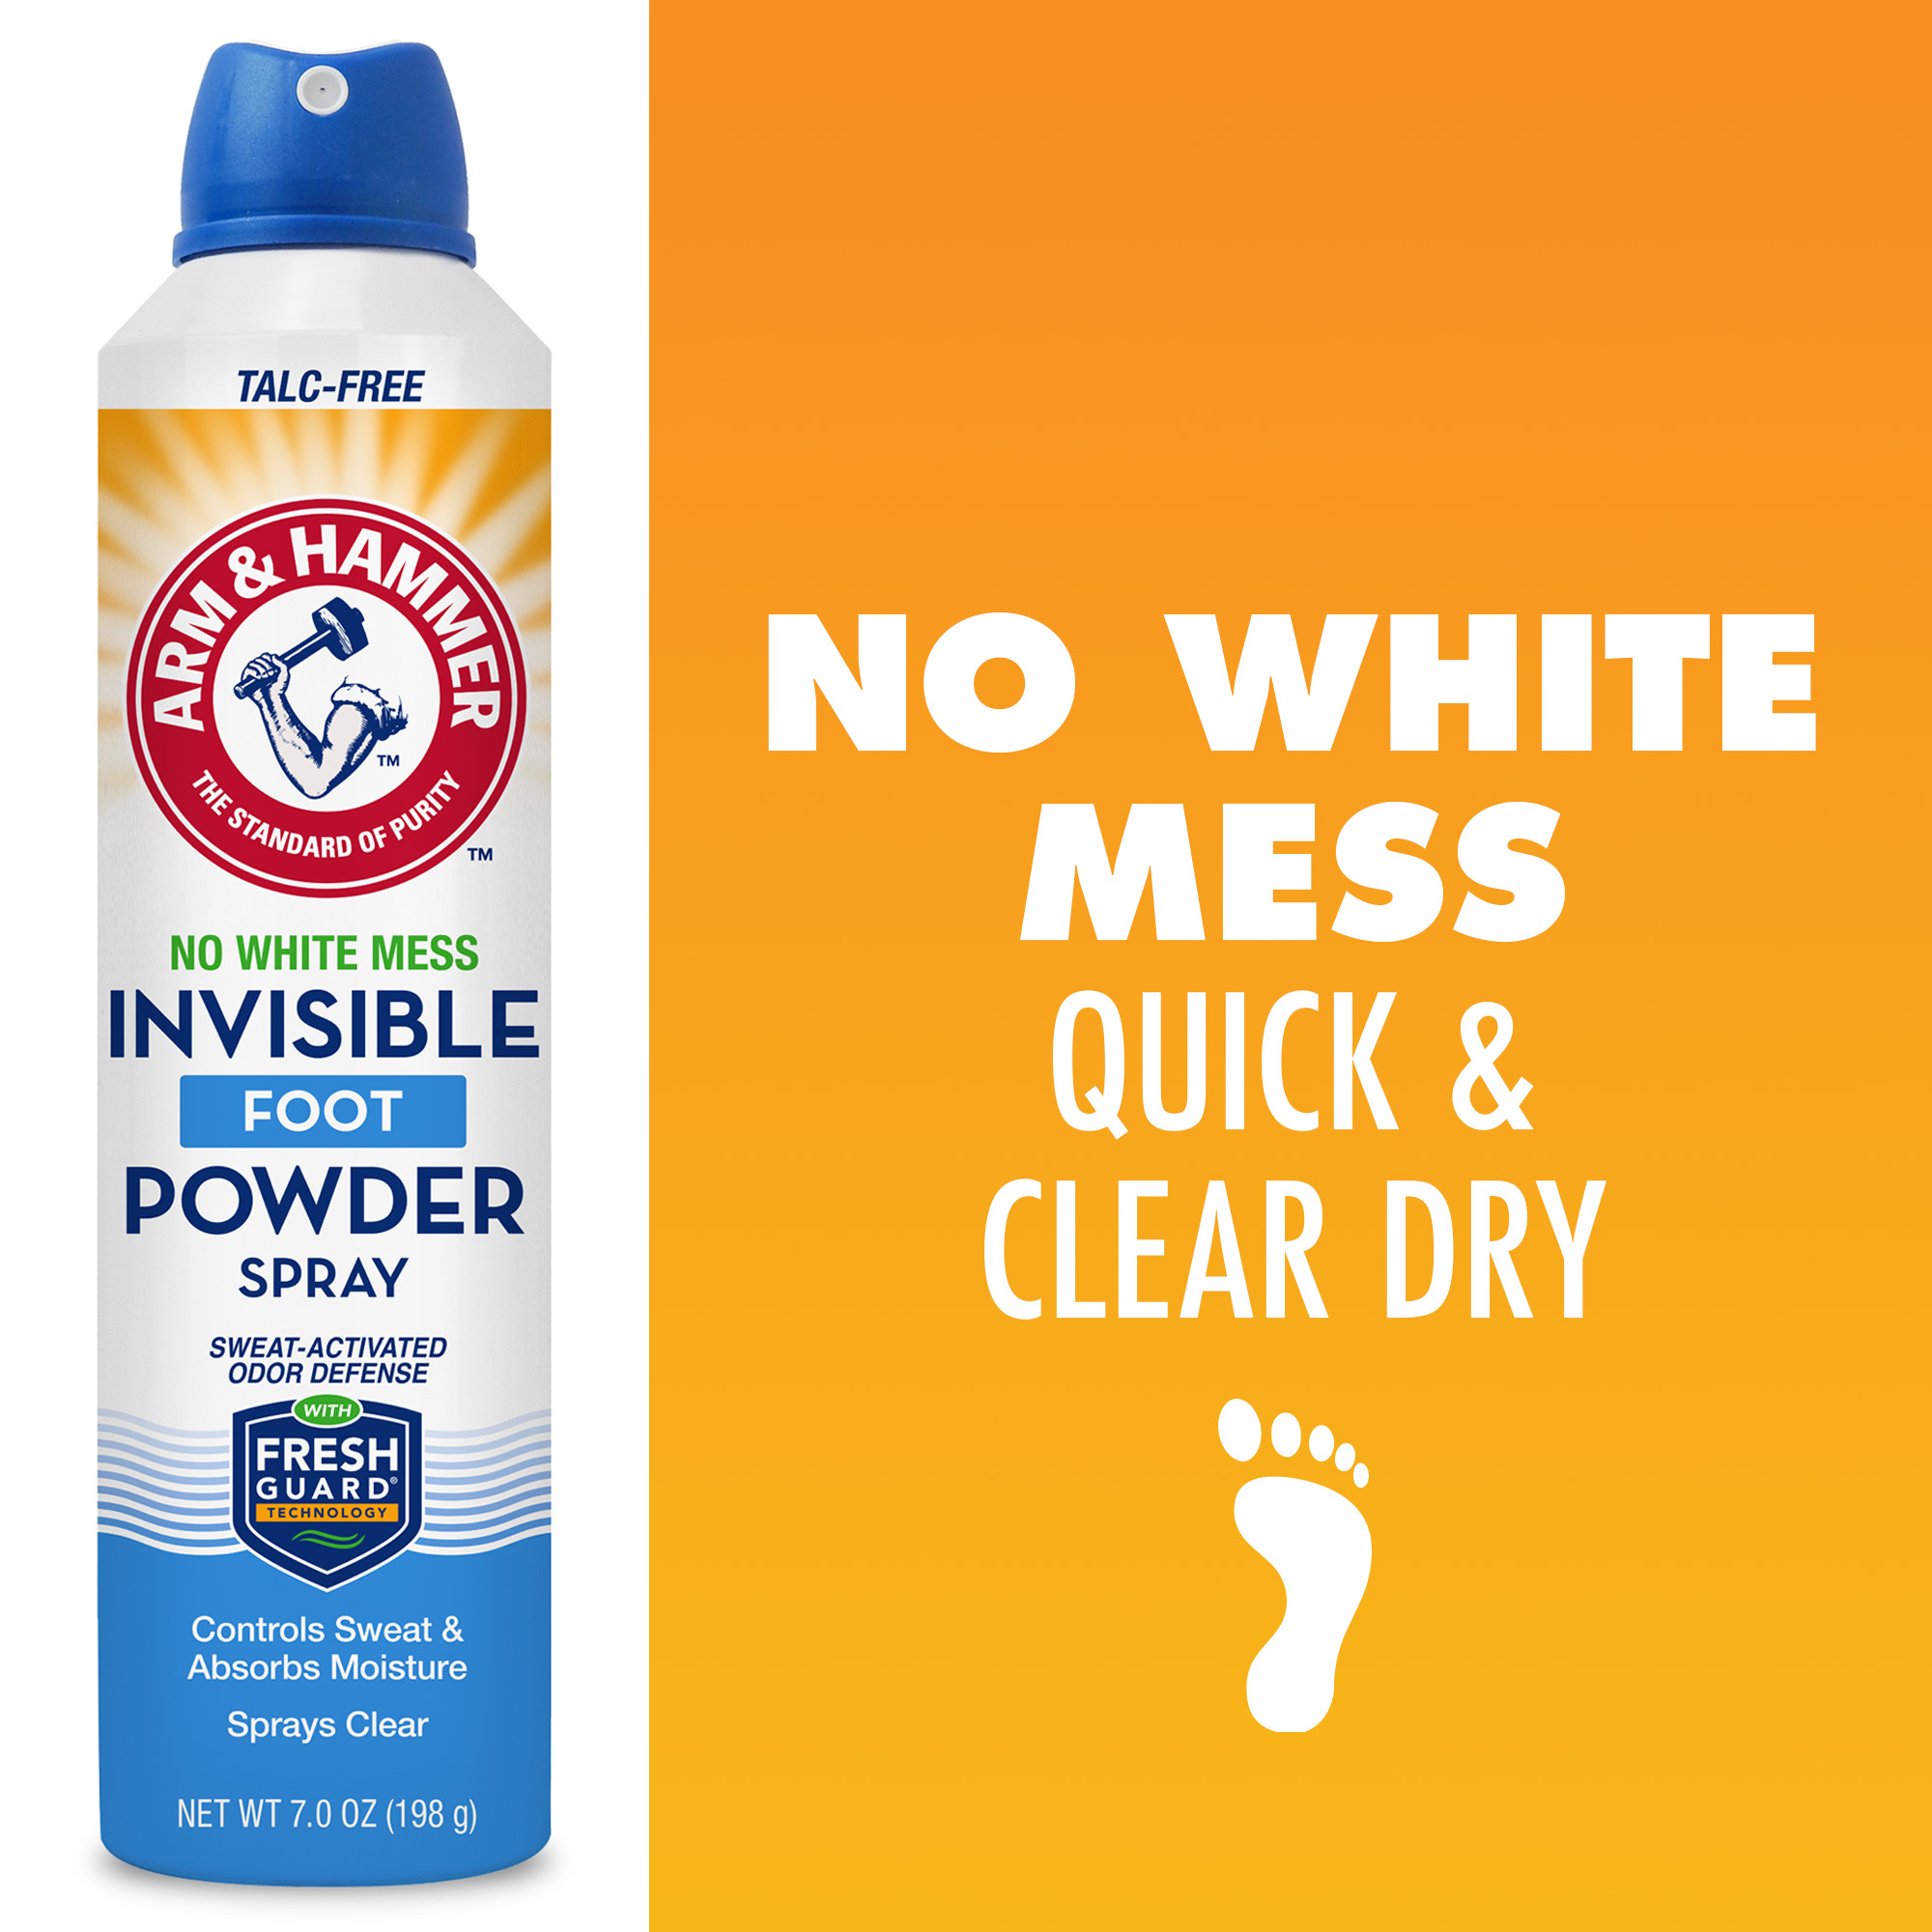 Arm & Hammer Invisible Spray Foot Powder - image 7 of 14